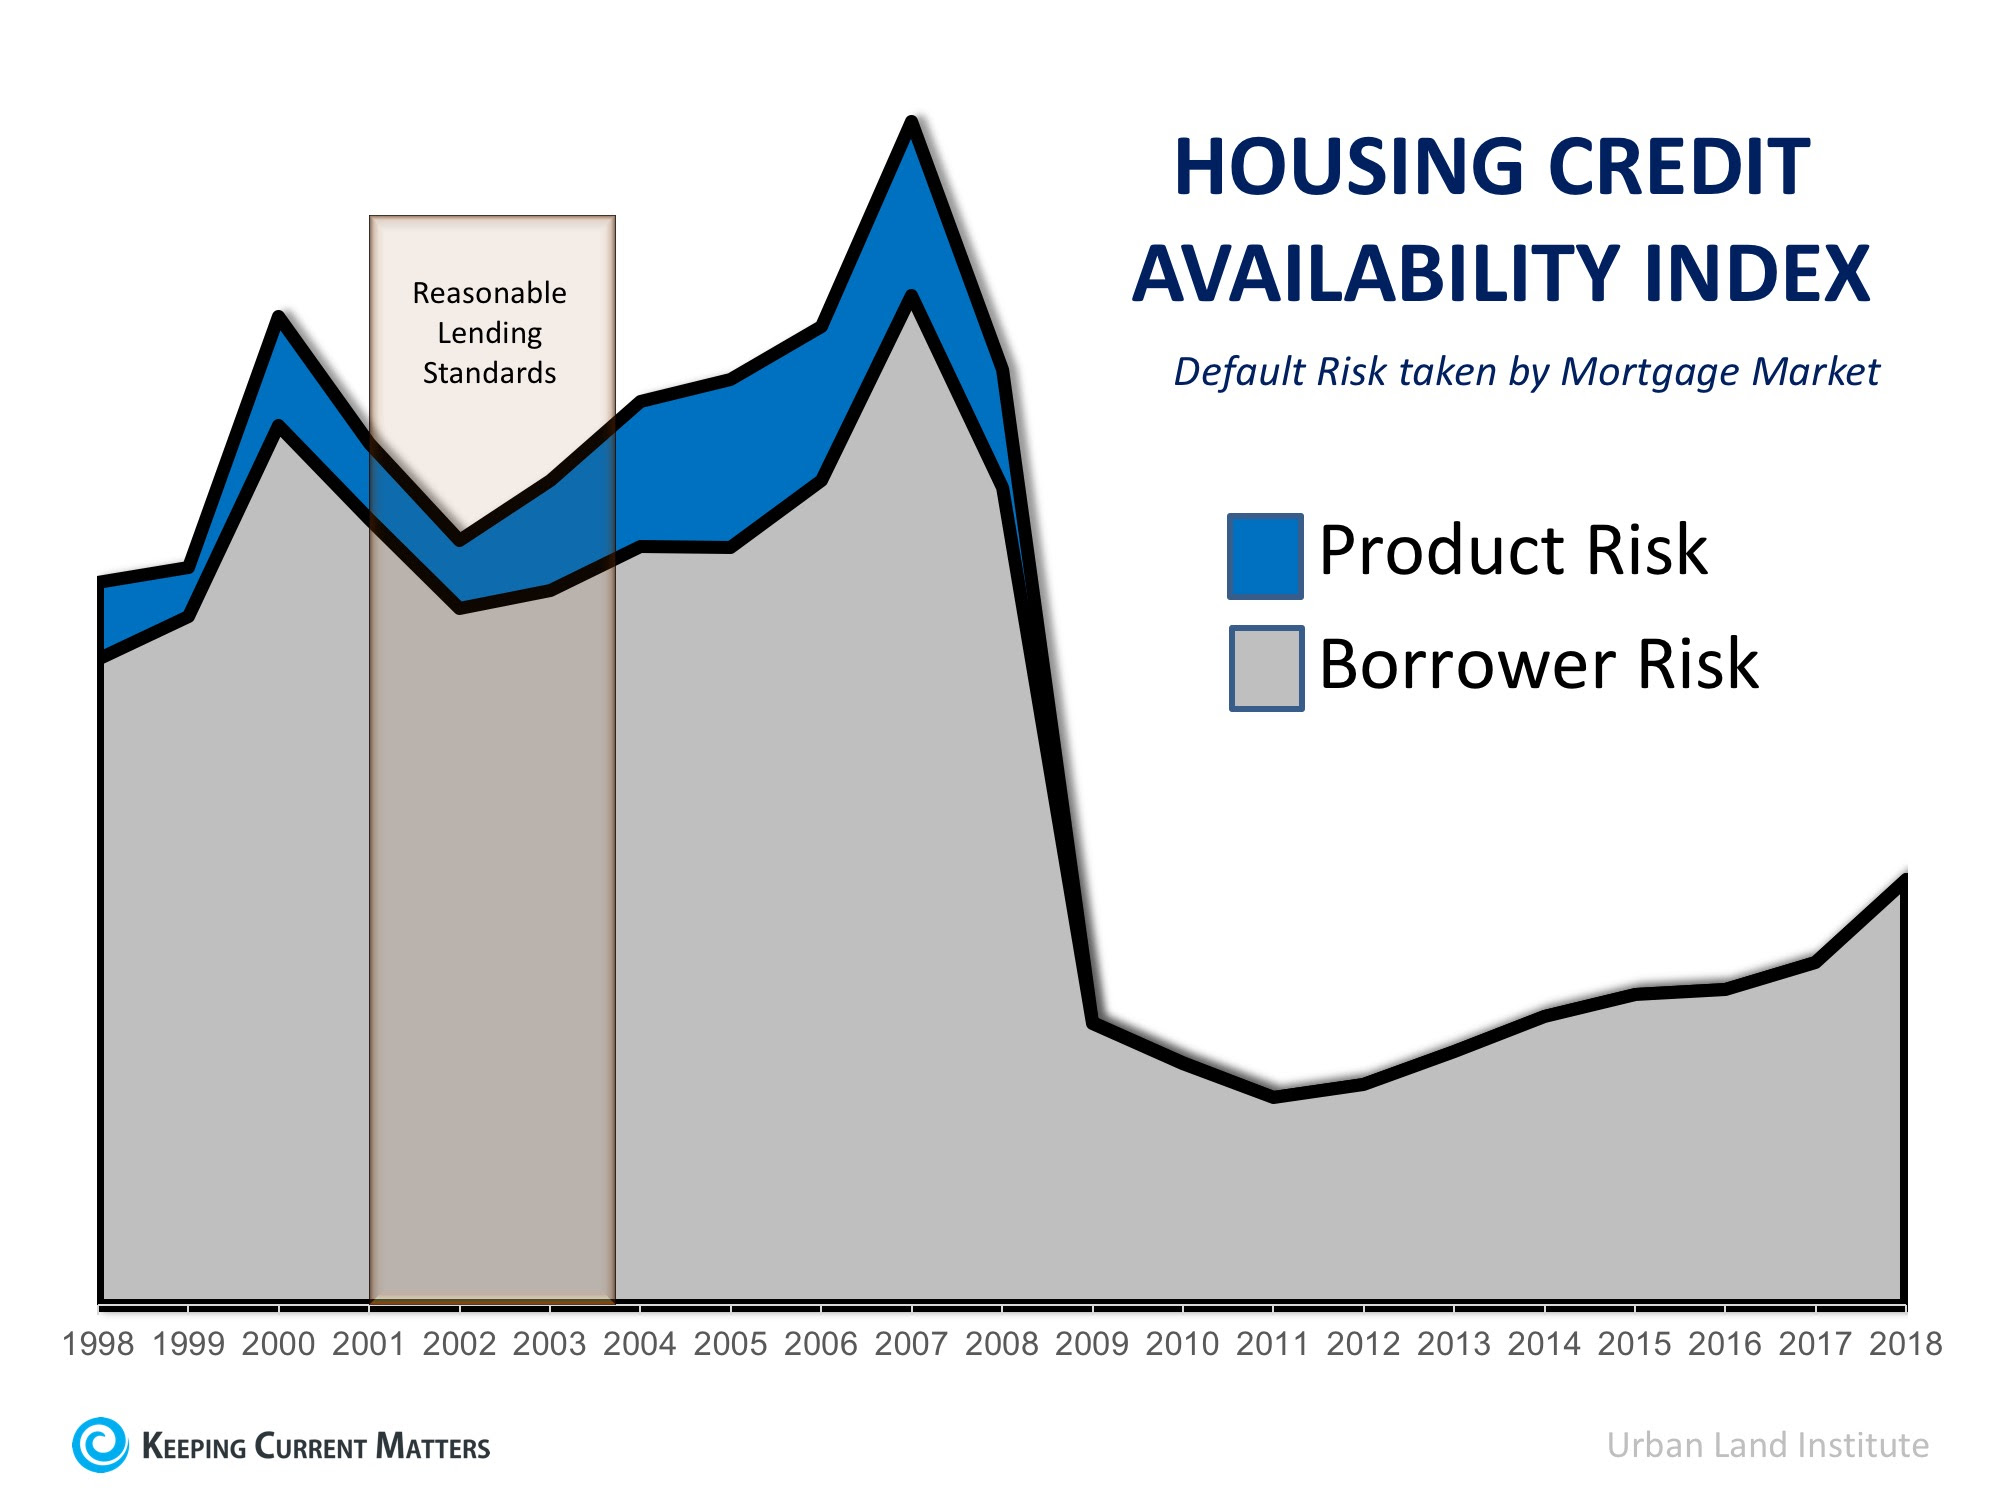 Housing Credit Availability Index